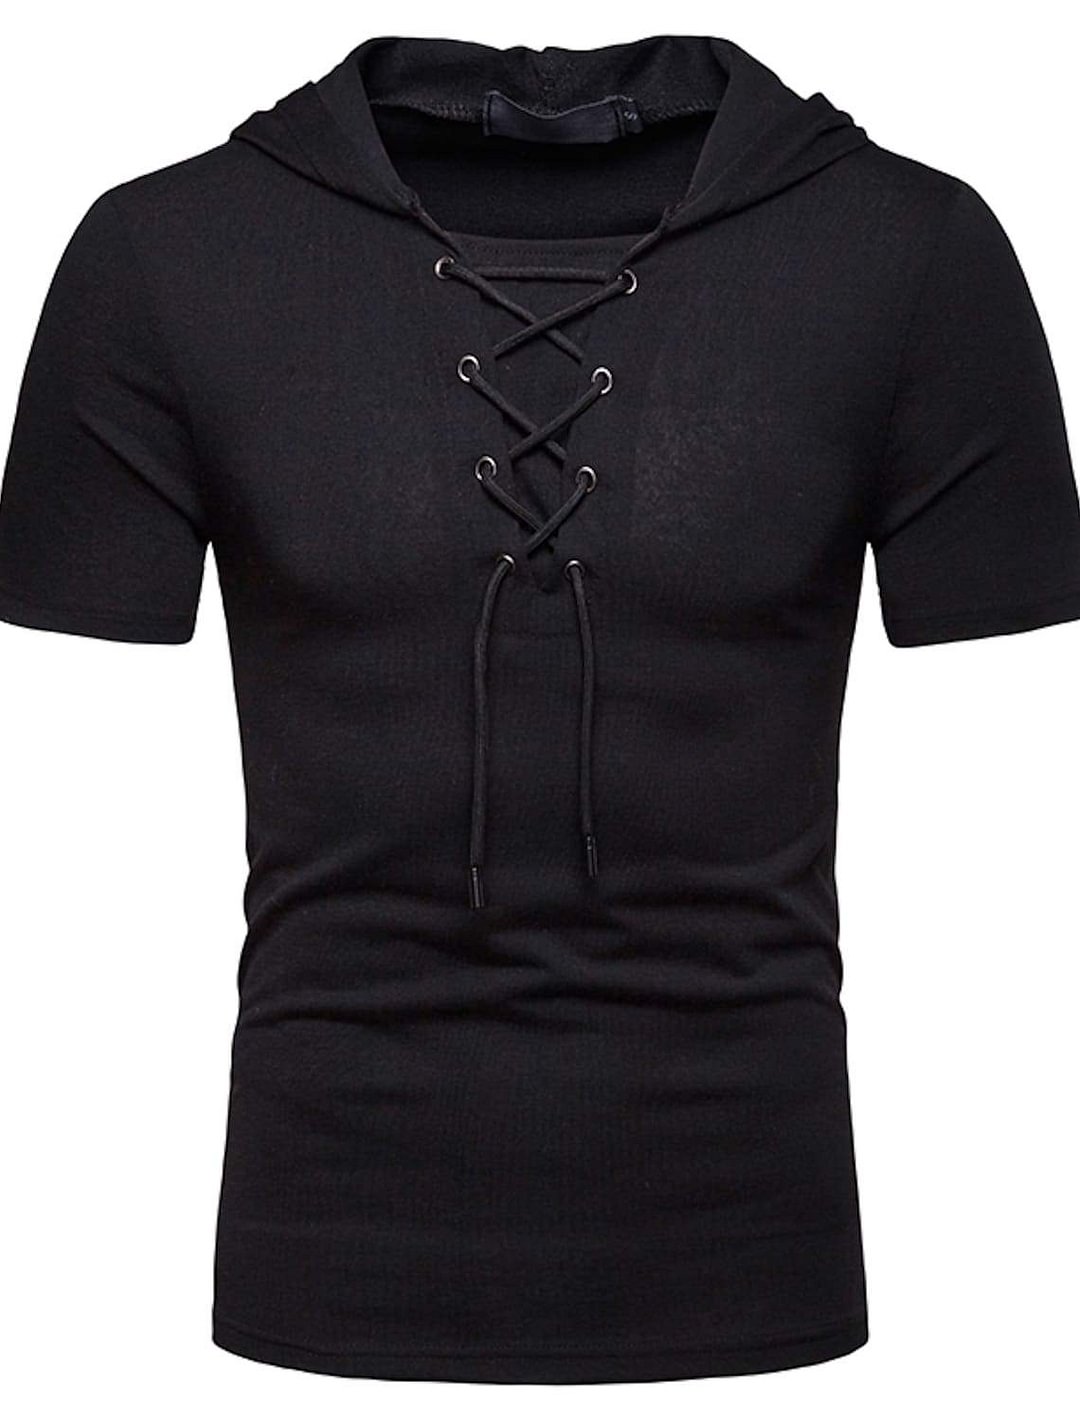 Men's T shirt Shirt Solid Colored Lace up Short Sleeve Daily Tops Basic Shirt Collar White Light gray Black-Corachic